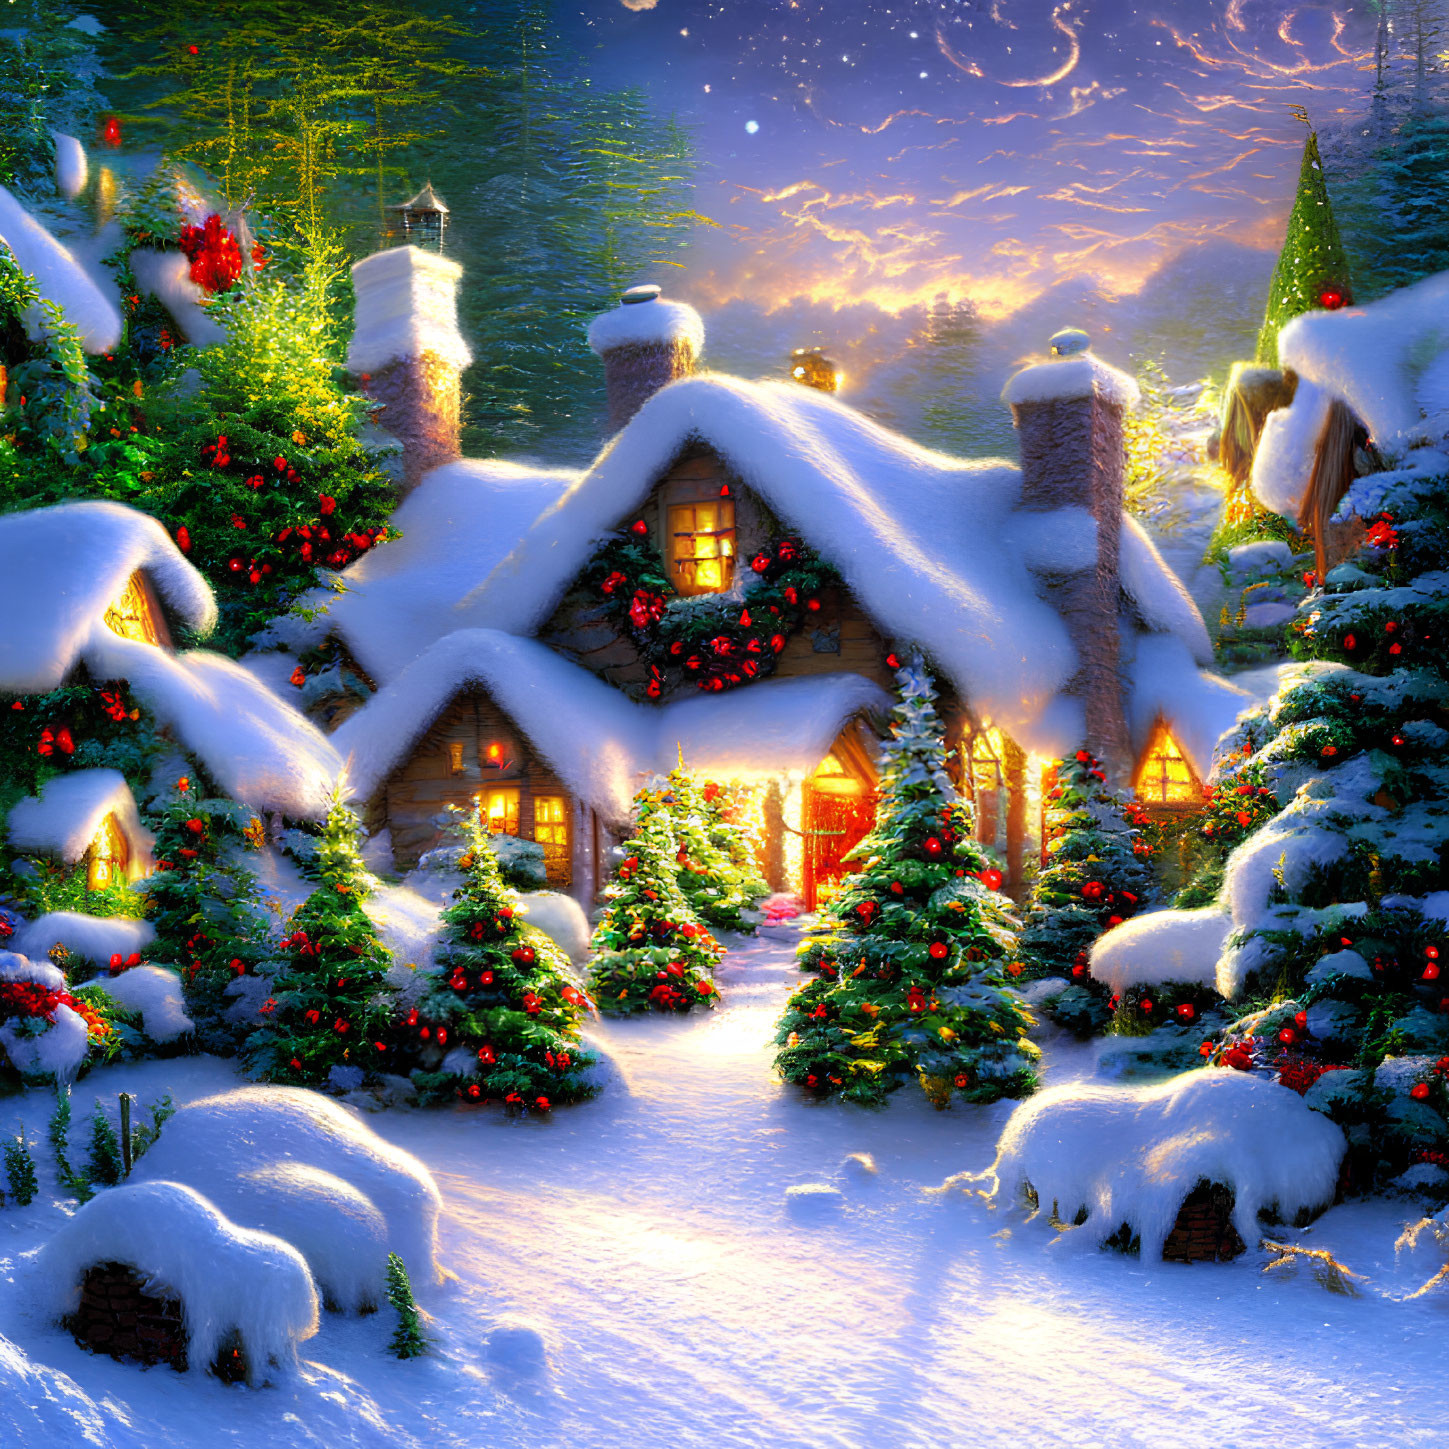 Snowy village with Christmas decorations and starlit sky